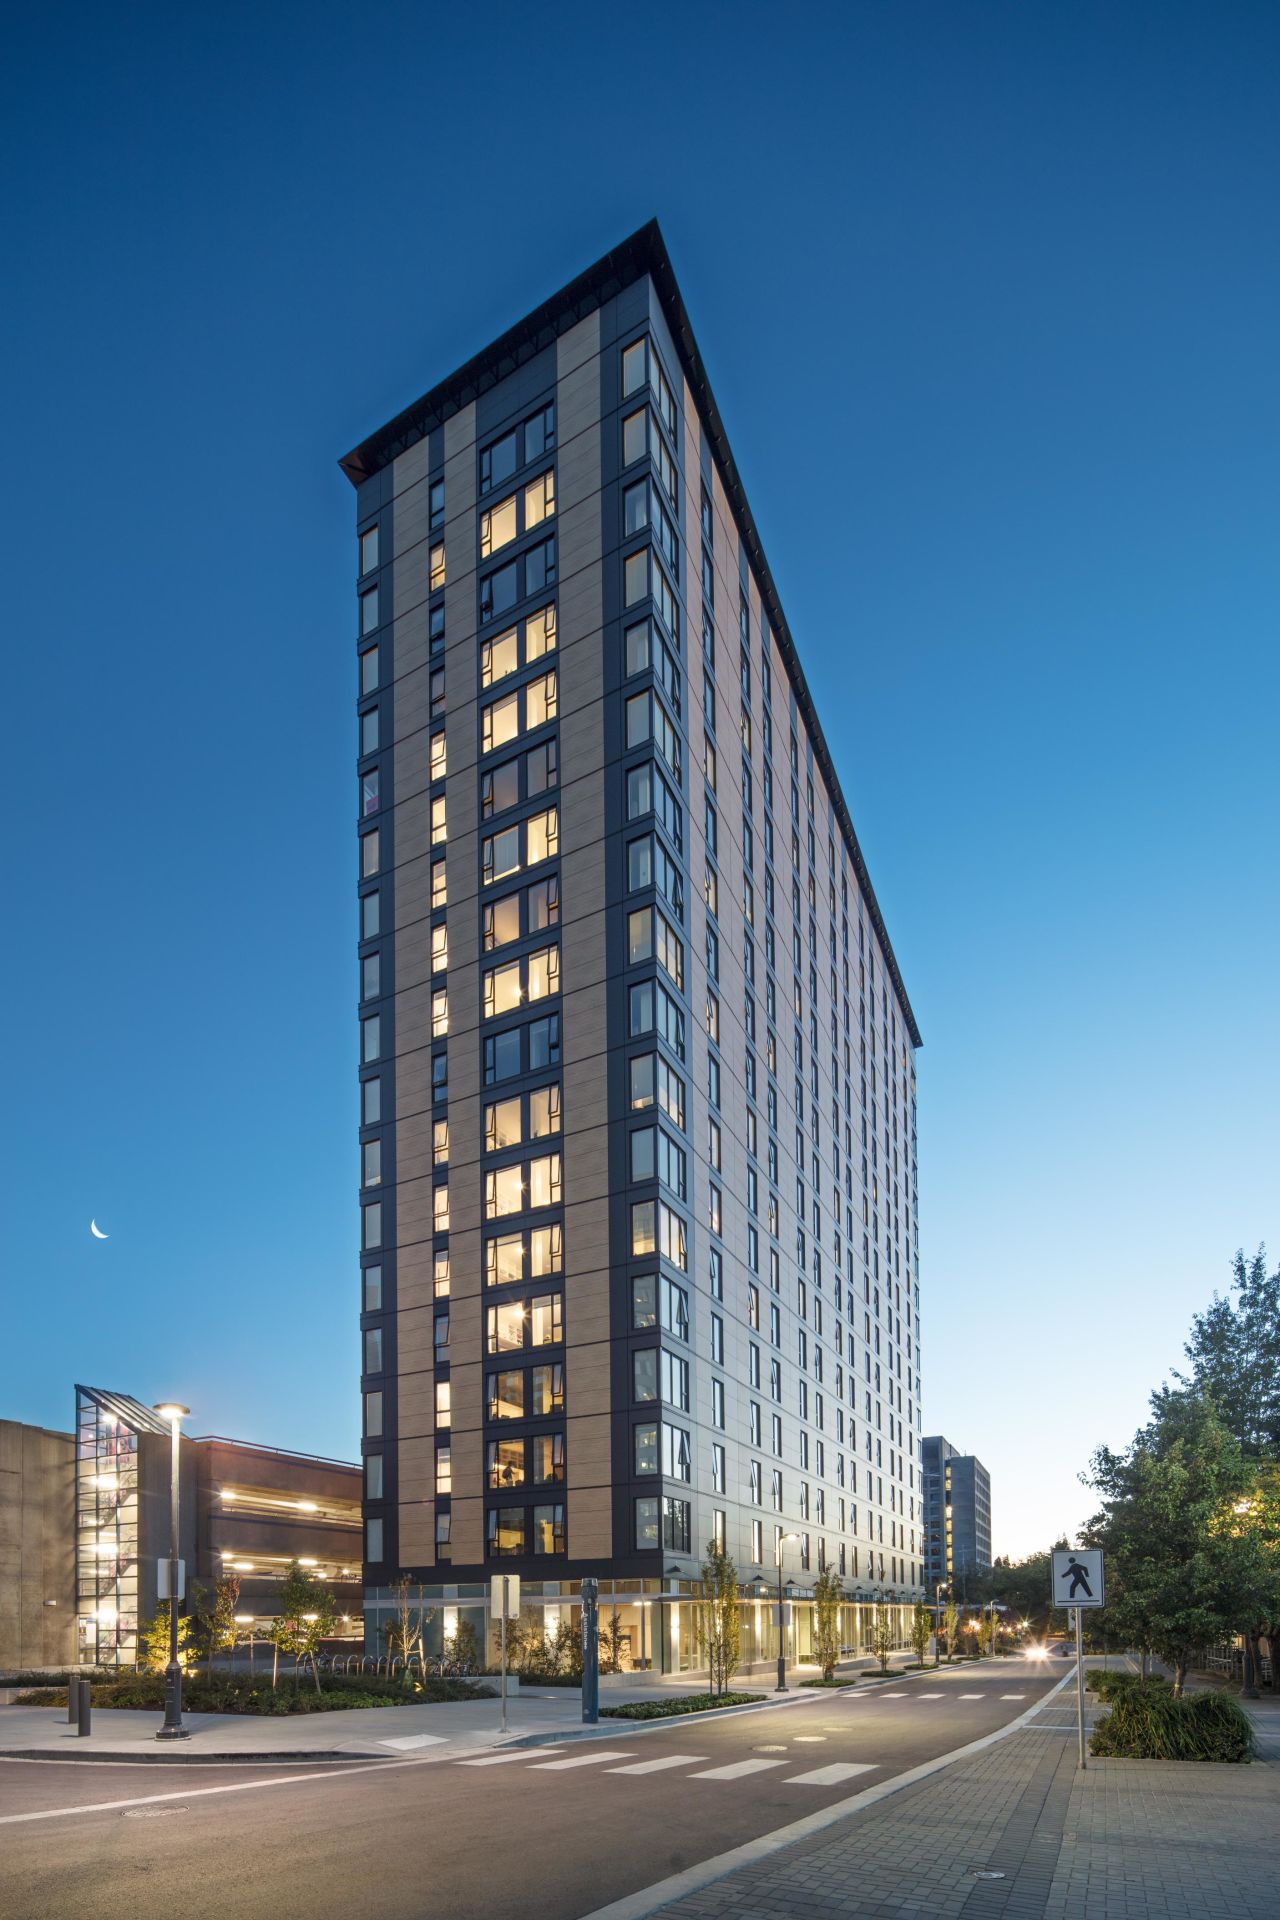 Designed by Acton Ostry Architects, the University of British Columbia's student residence Brock Commons Tallwood House, in Vancouver, stands at 174 feet tall.